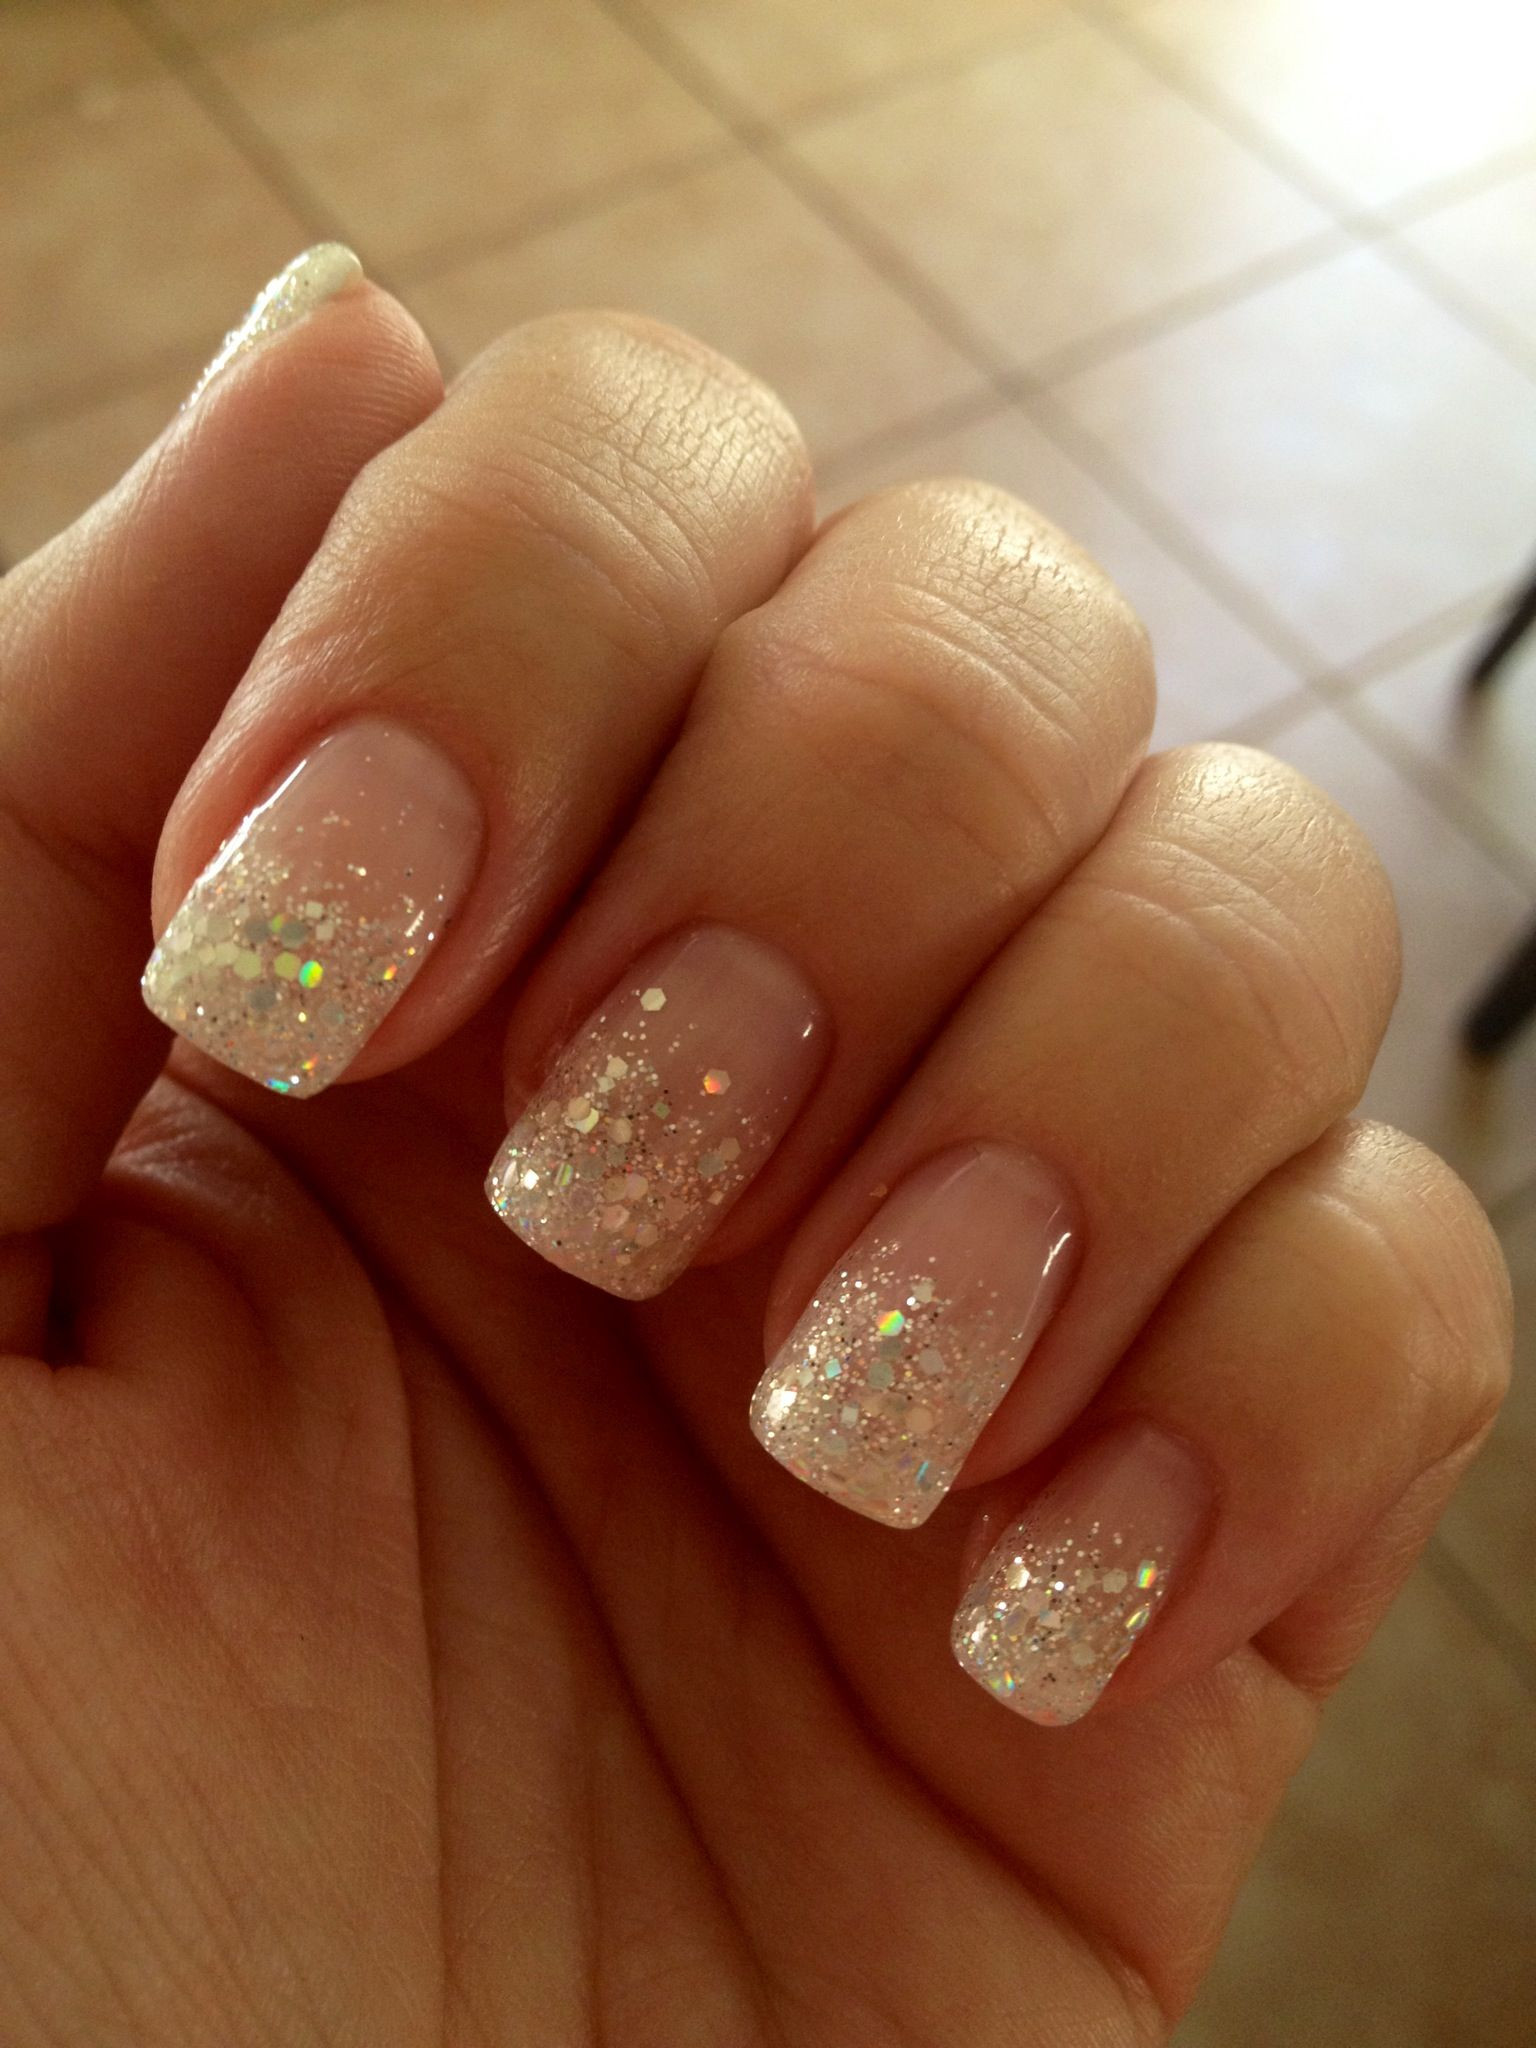 Glitter Nails Pinterest
 Glitter French Manicure Fade Can you say wedding nails